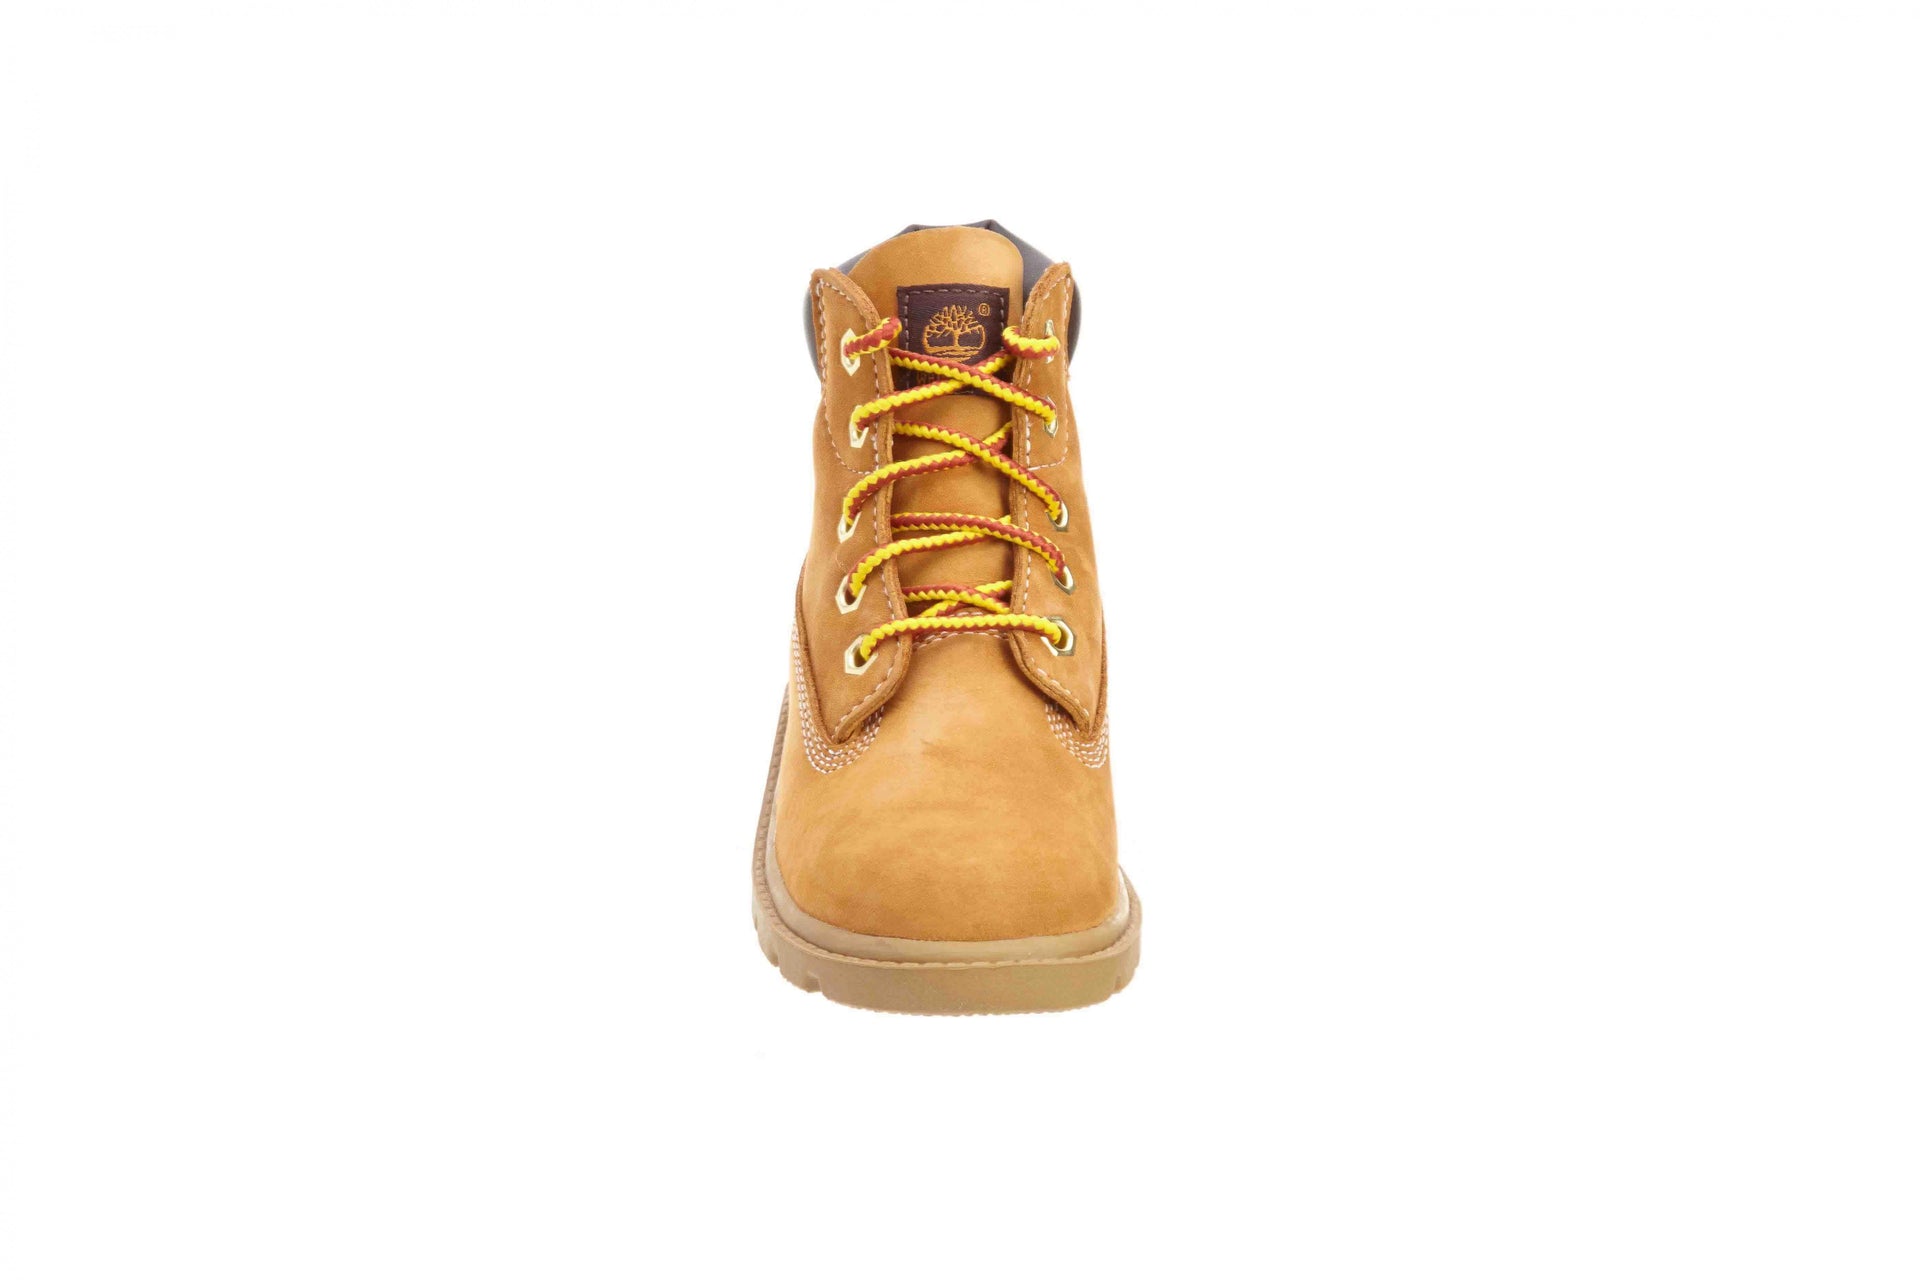 Timberland 6 IN BOOT Toddlers Style # 10860